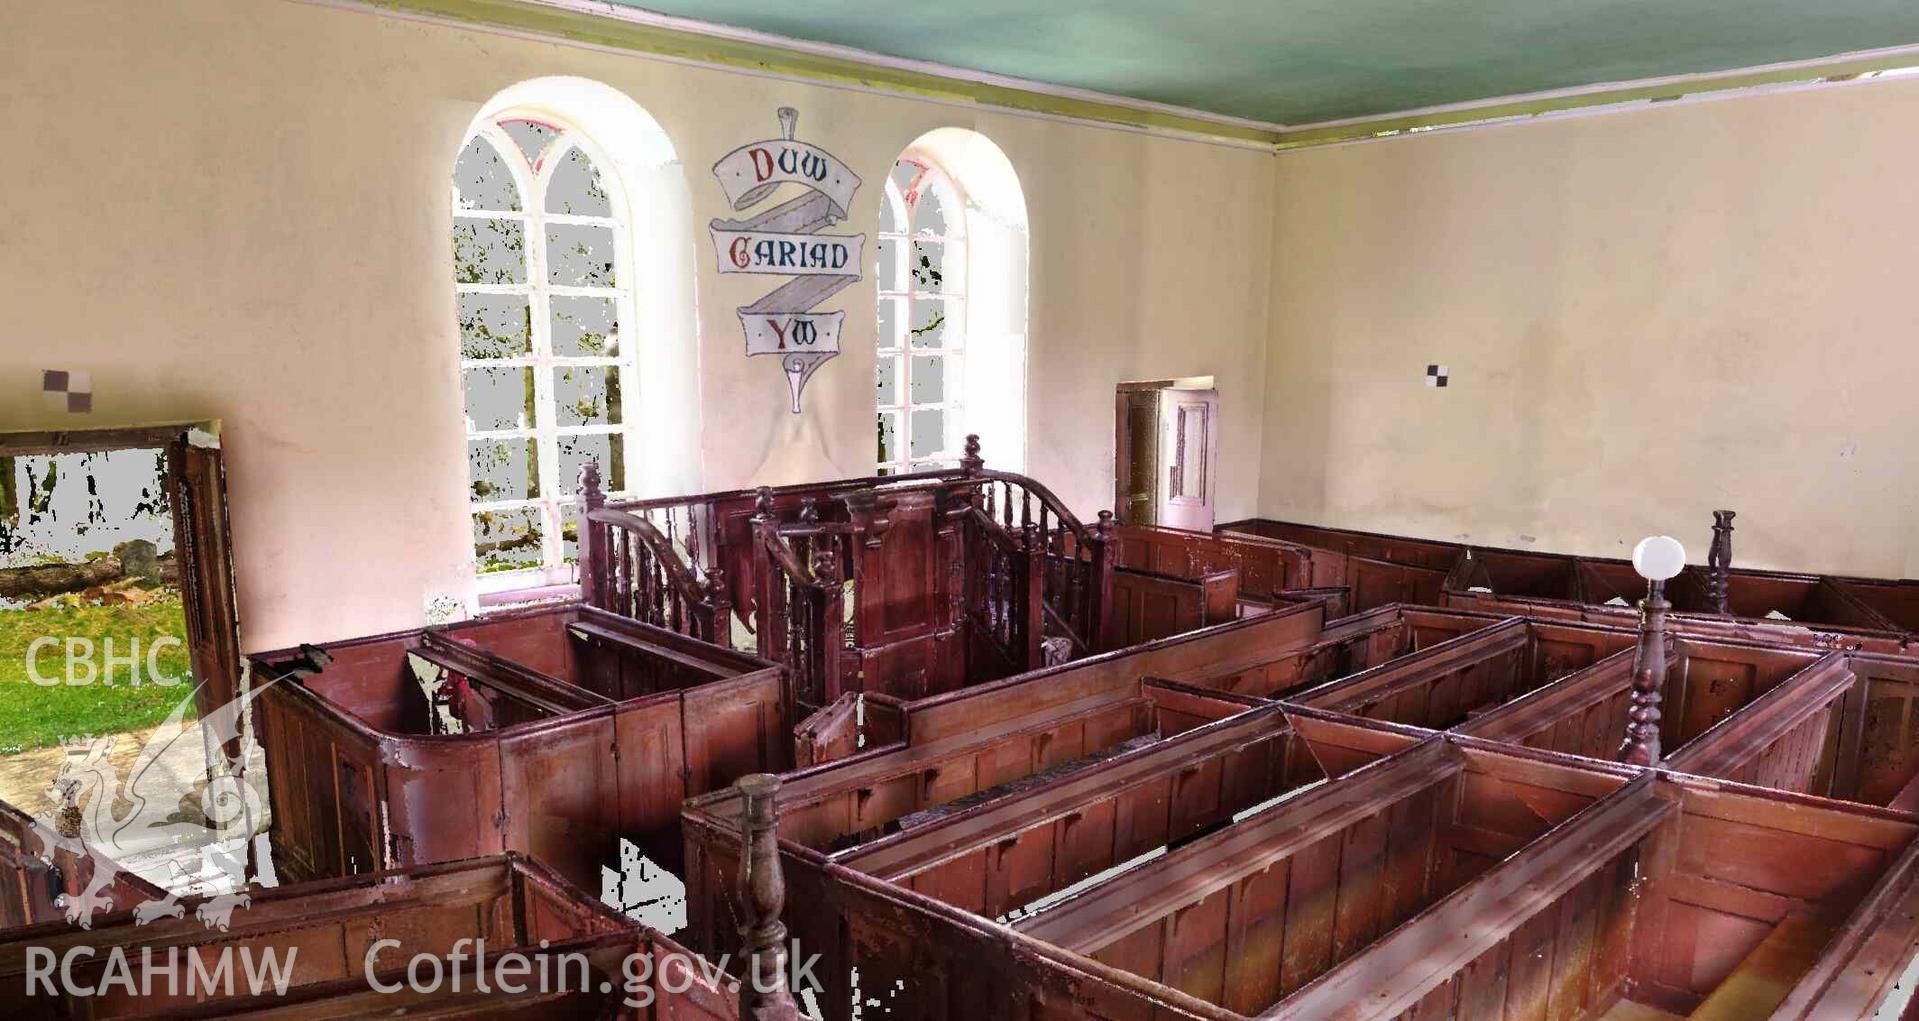 View of chapel interior, derived from laser scan point cloud data. Part of Terrestrial Laser Scanning Survey archive for Capel Soar-y-Mynydd, carried out by Dr Jayne Kamintzis of RCAHMW on 9 May 2023.